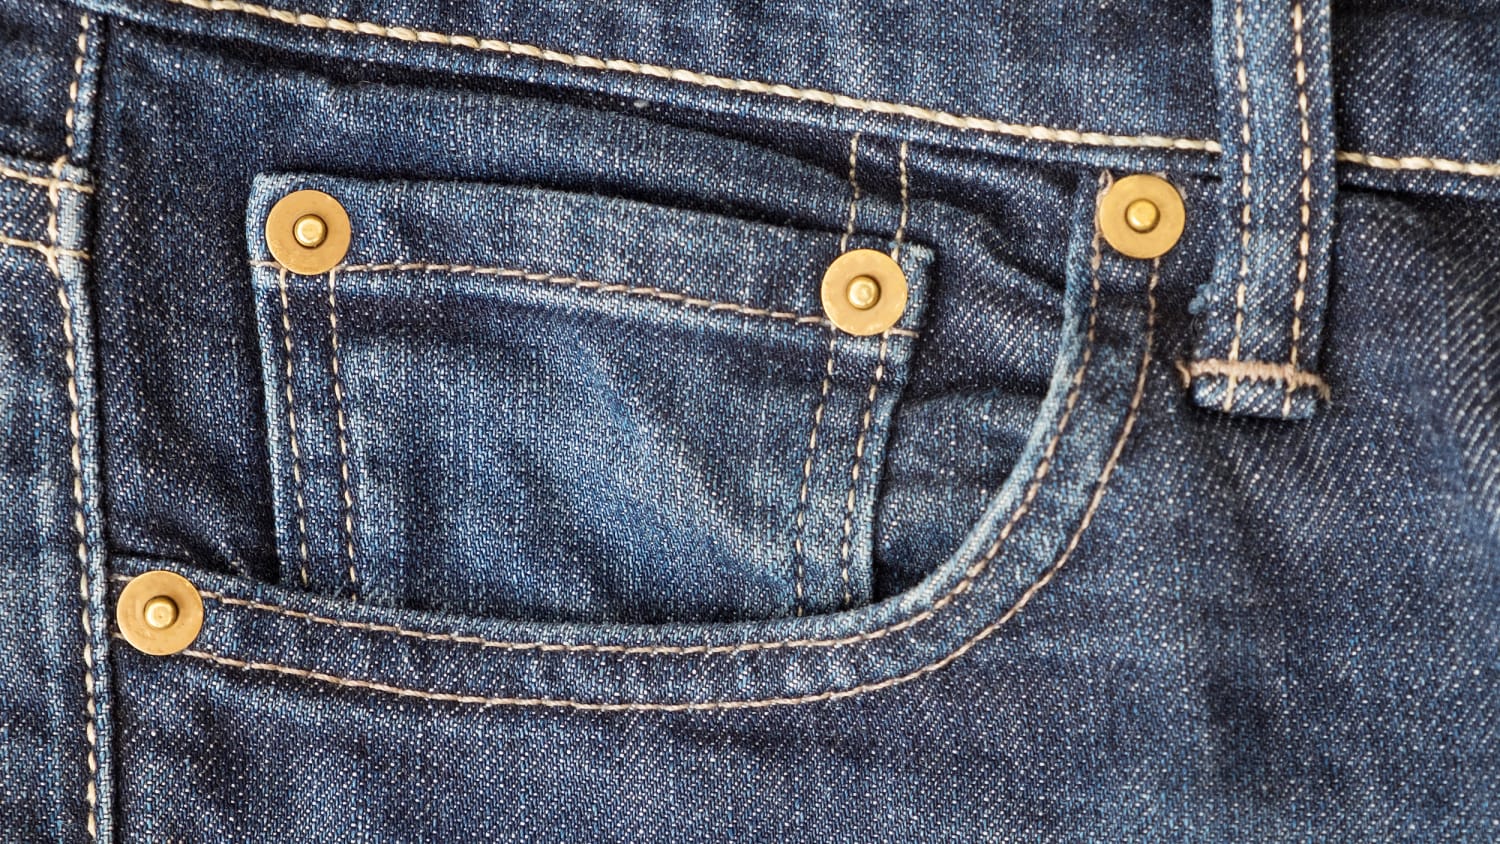 Small Pocket on Your Pants and Jeans: Here's What It's for